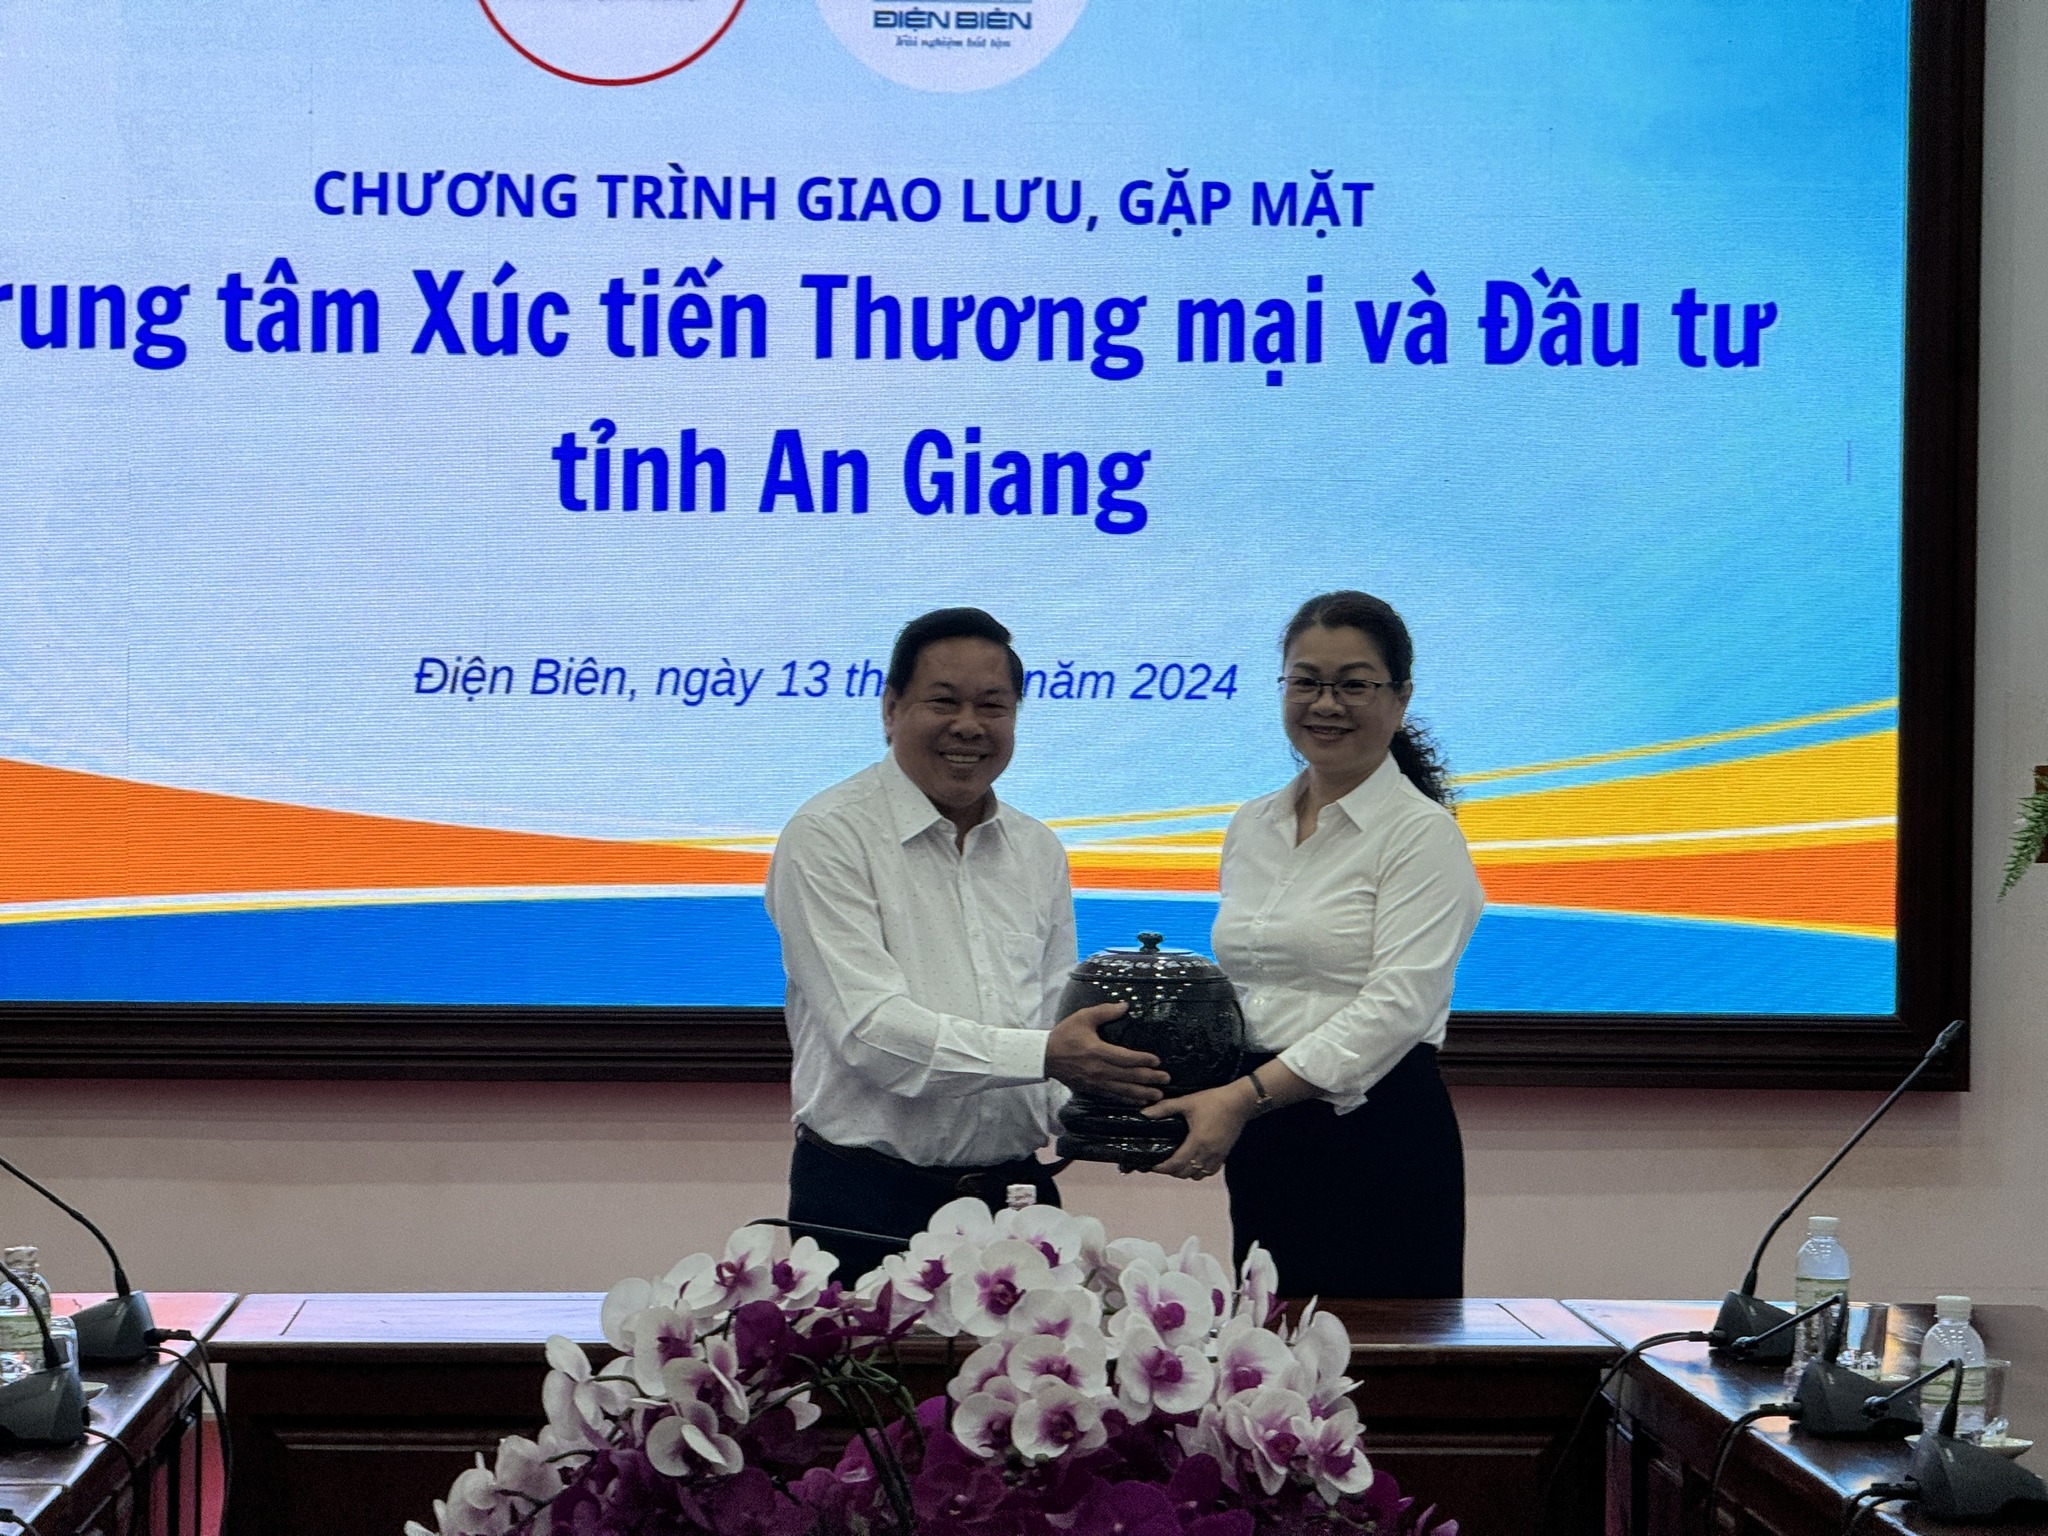 LINKAGE AND DEVELOPMENT COOPERATION PROGRAM BETWEEN AN GIANG PROVINCE AND DIEN BIEN PROVINCE